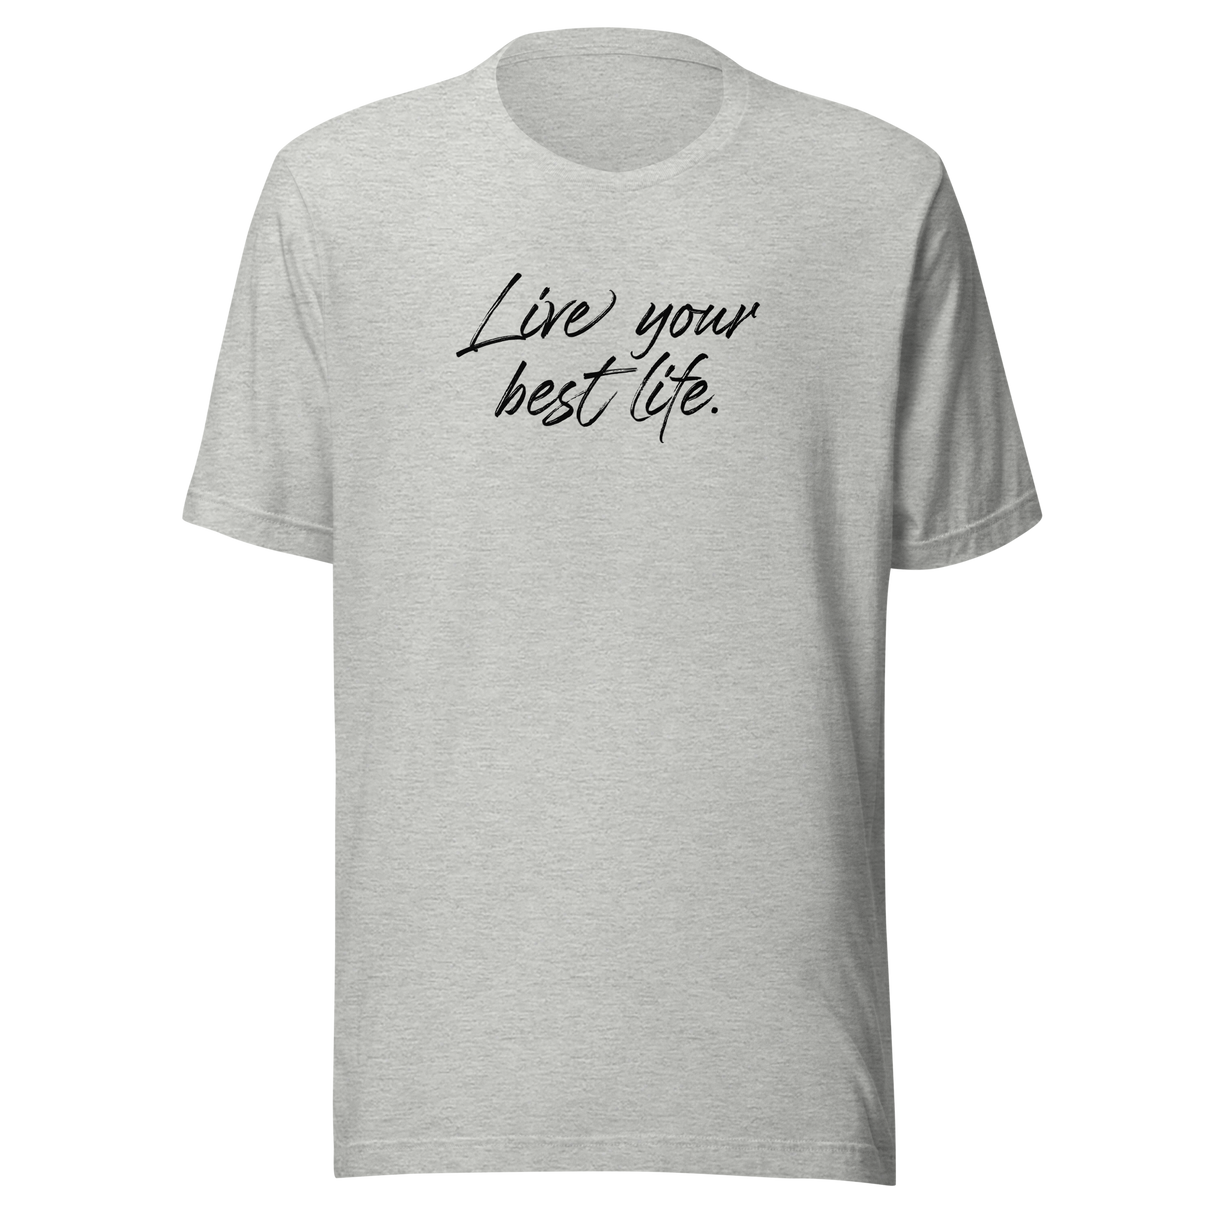 live-your-best-life-live-your-best-life-tee-having-fun-t-shirt-life-tee-inspirational-t-shirt-motivational-tee#color_athletic-heather